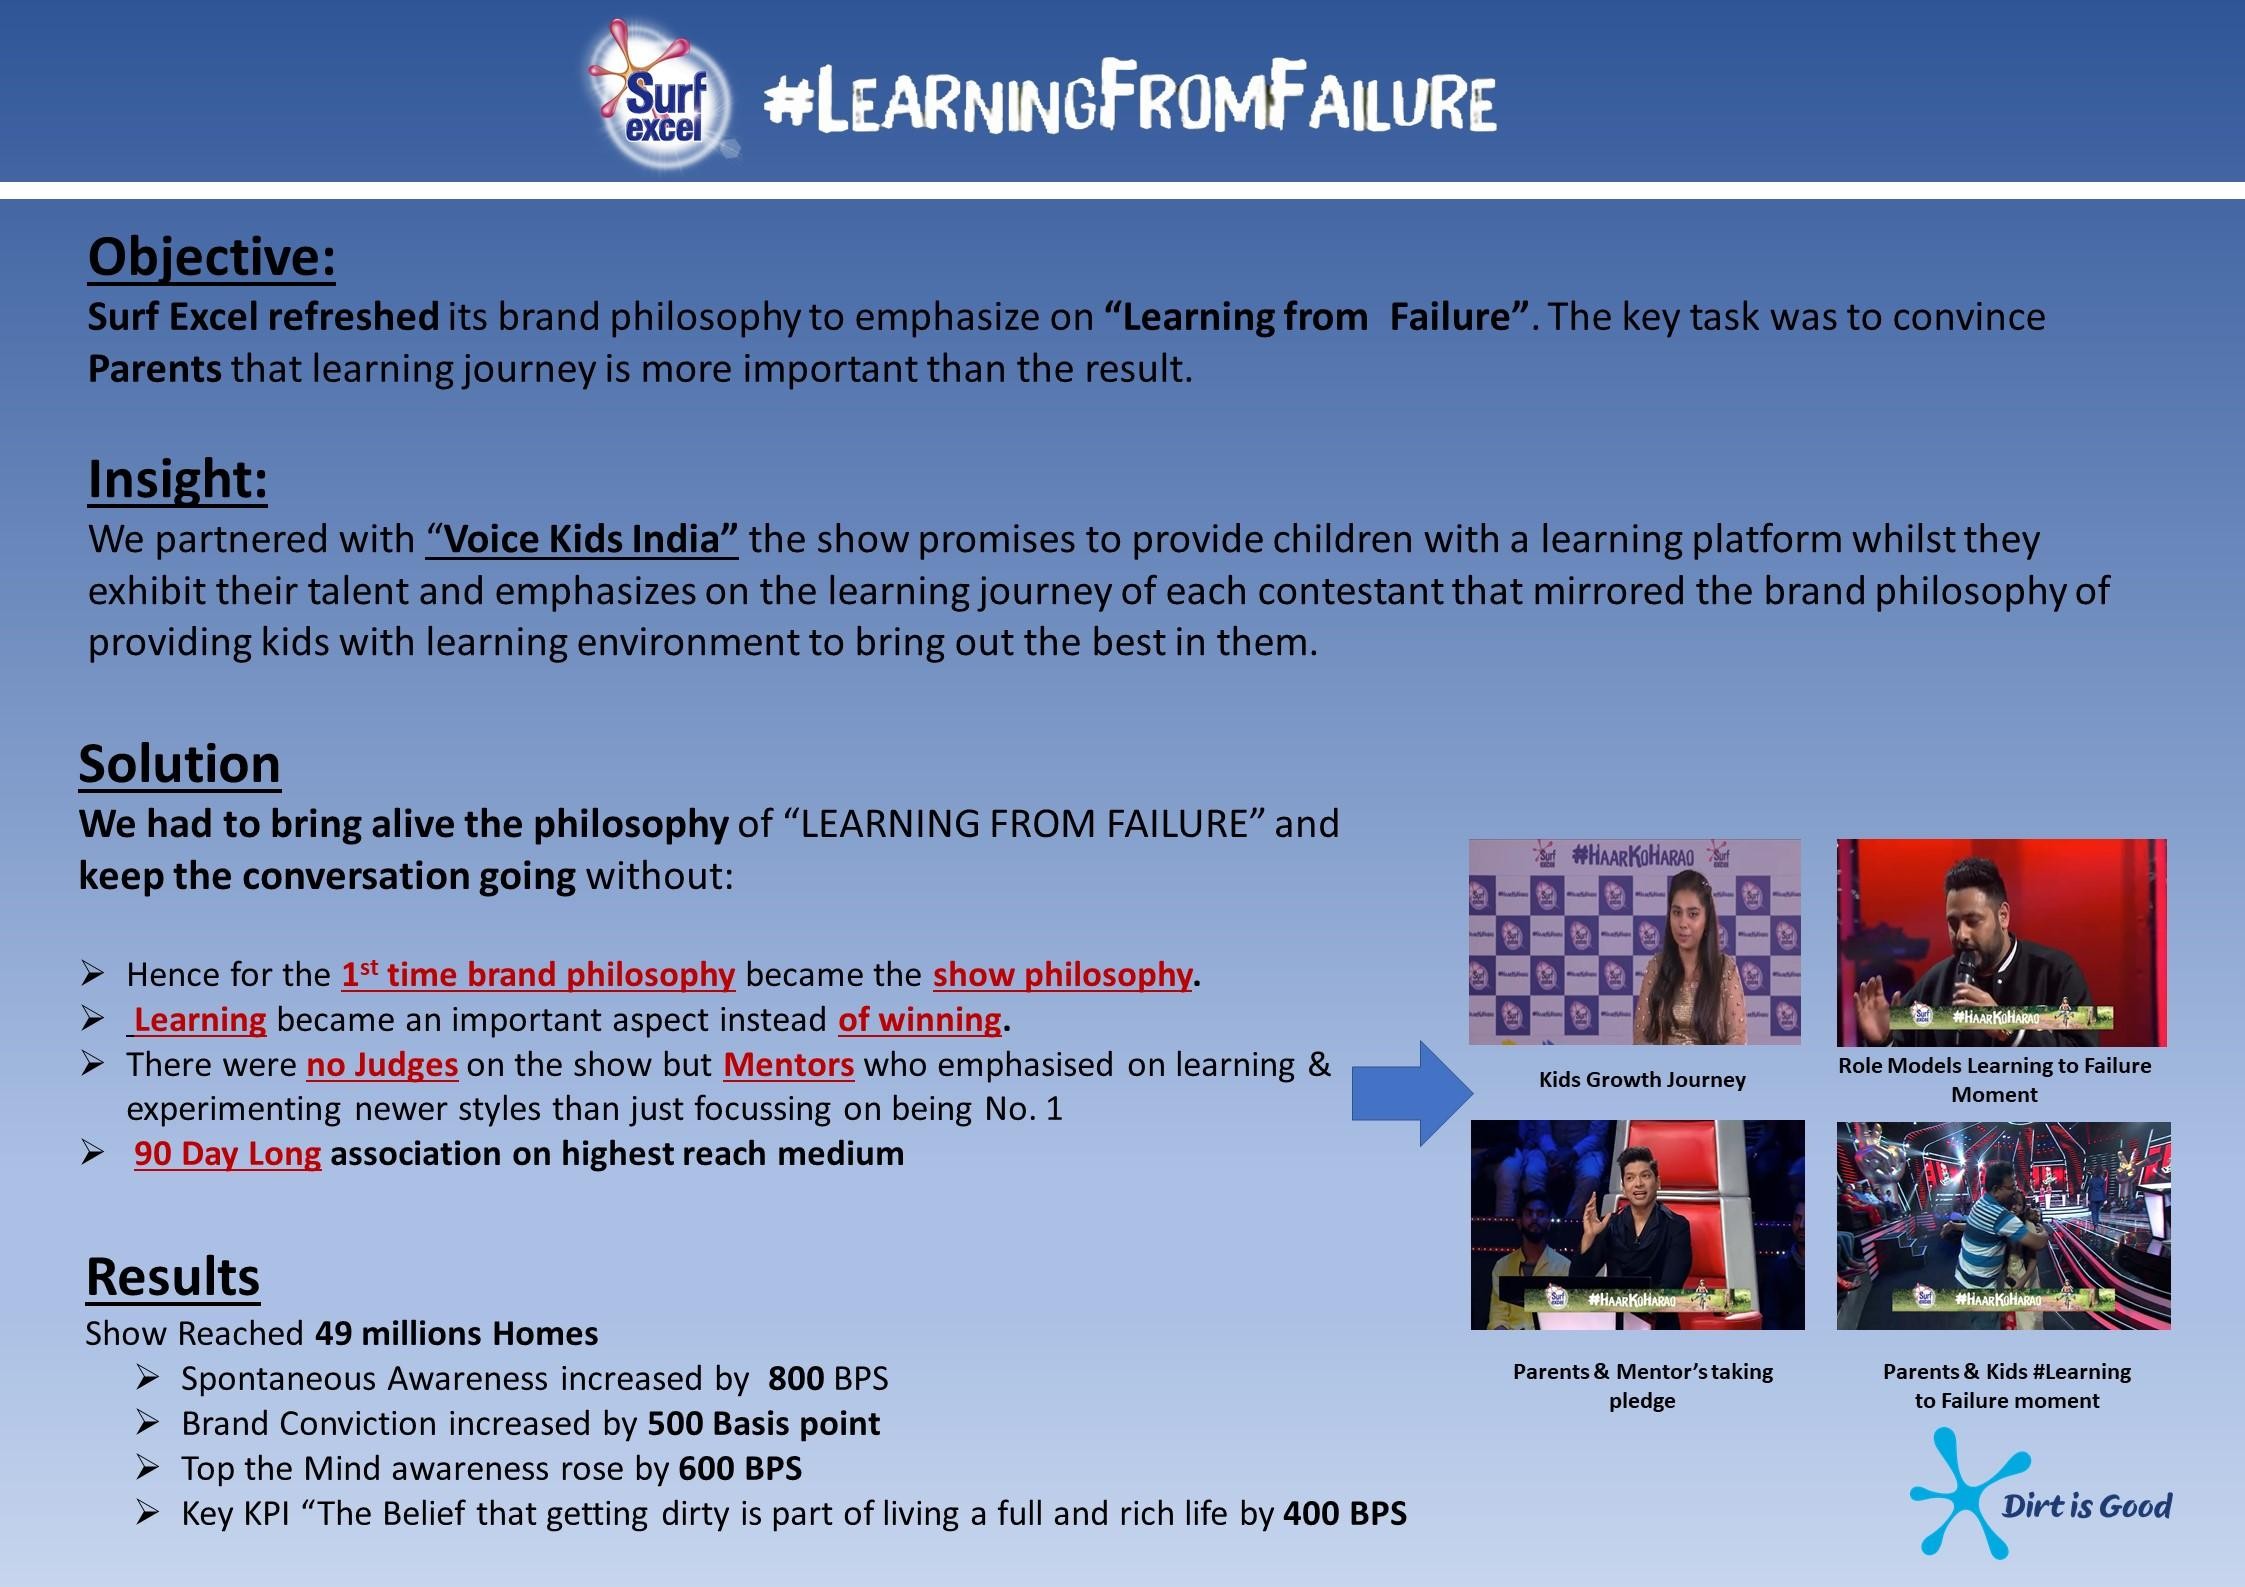 Surf Excel - #LearningFromFailure